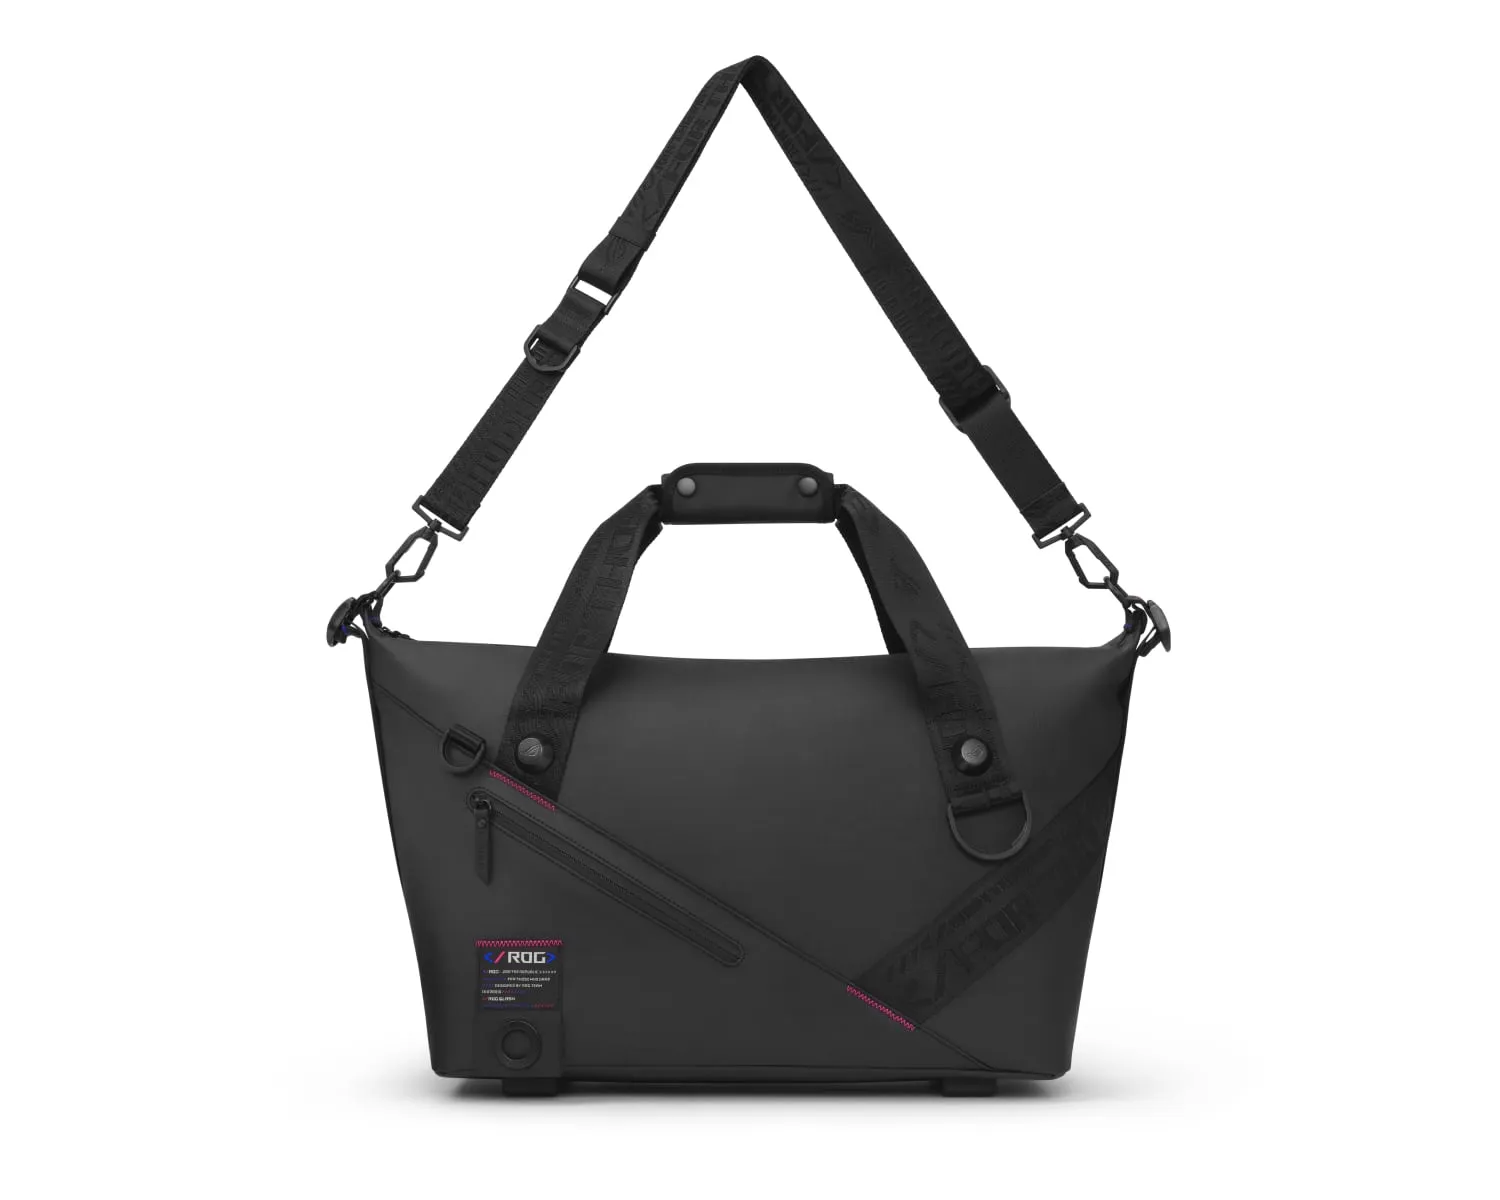 The ROG SLASH Duffle Bag, with both the hand carry handle and shoulder strap fully extended